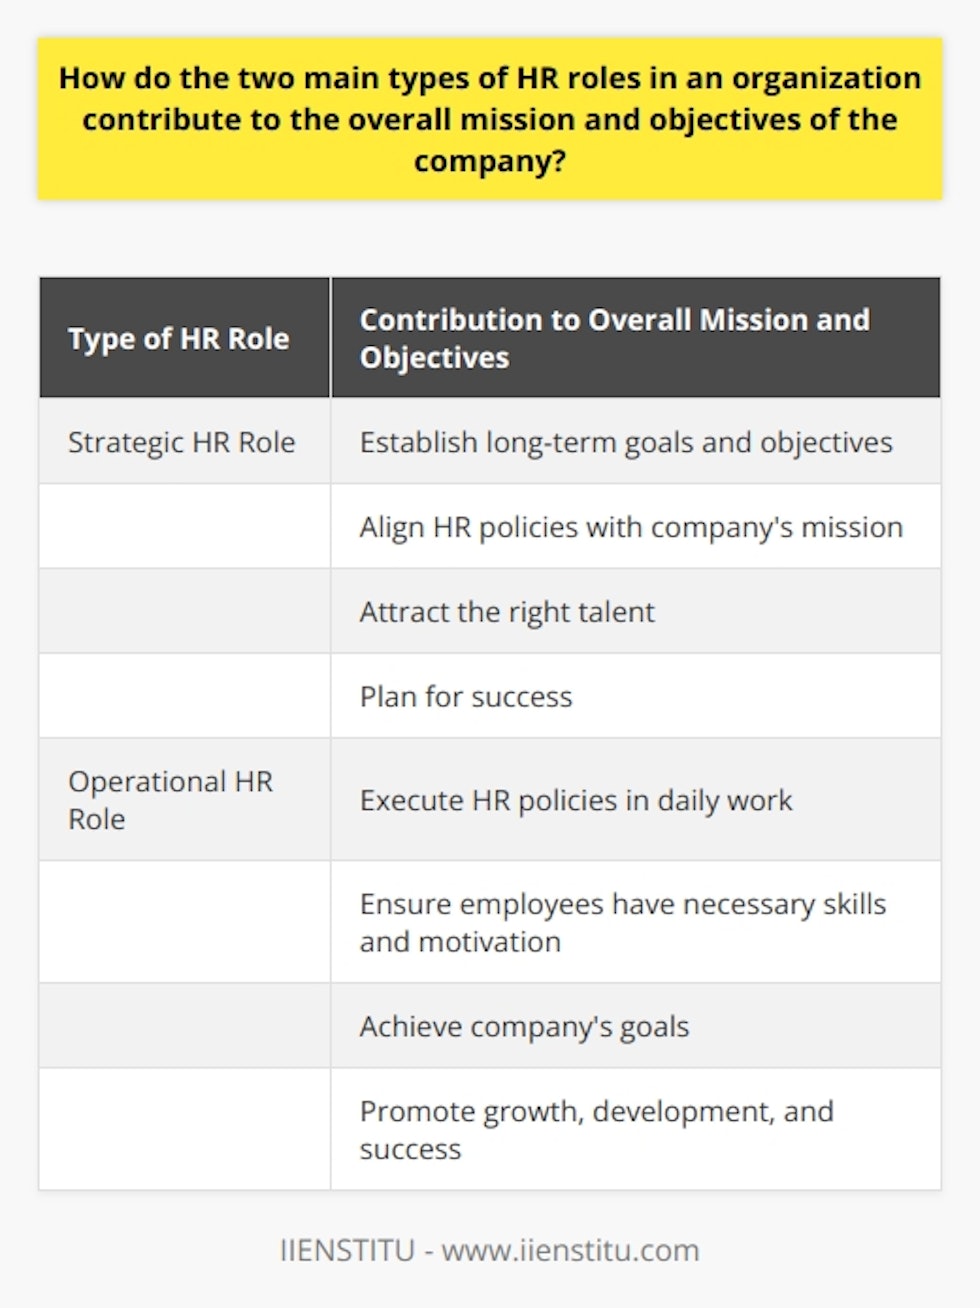 In conclusion, the two main types of HR roles, strategic and operational, play critical roles in an organization's overall mission and objectives. Strategic HR roles establish long-term goals and align HR policies with the company's mission, attracting the right talent and planning for success. Operational HR roles execute these policies in daily work, ensuring employees have the necessary skills and motivation to achieve goals. Integration of both roles is key to maintaining an adaptable and resilient organization. When these roles are effectively integrated, they contribute to a culture of growth, development, and success, ultimately furthering the achievement of the company's goals.